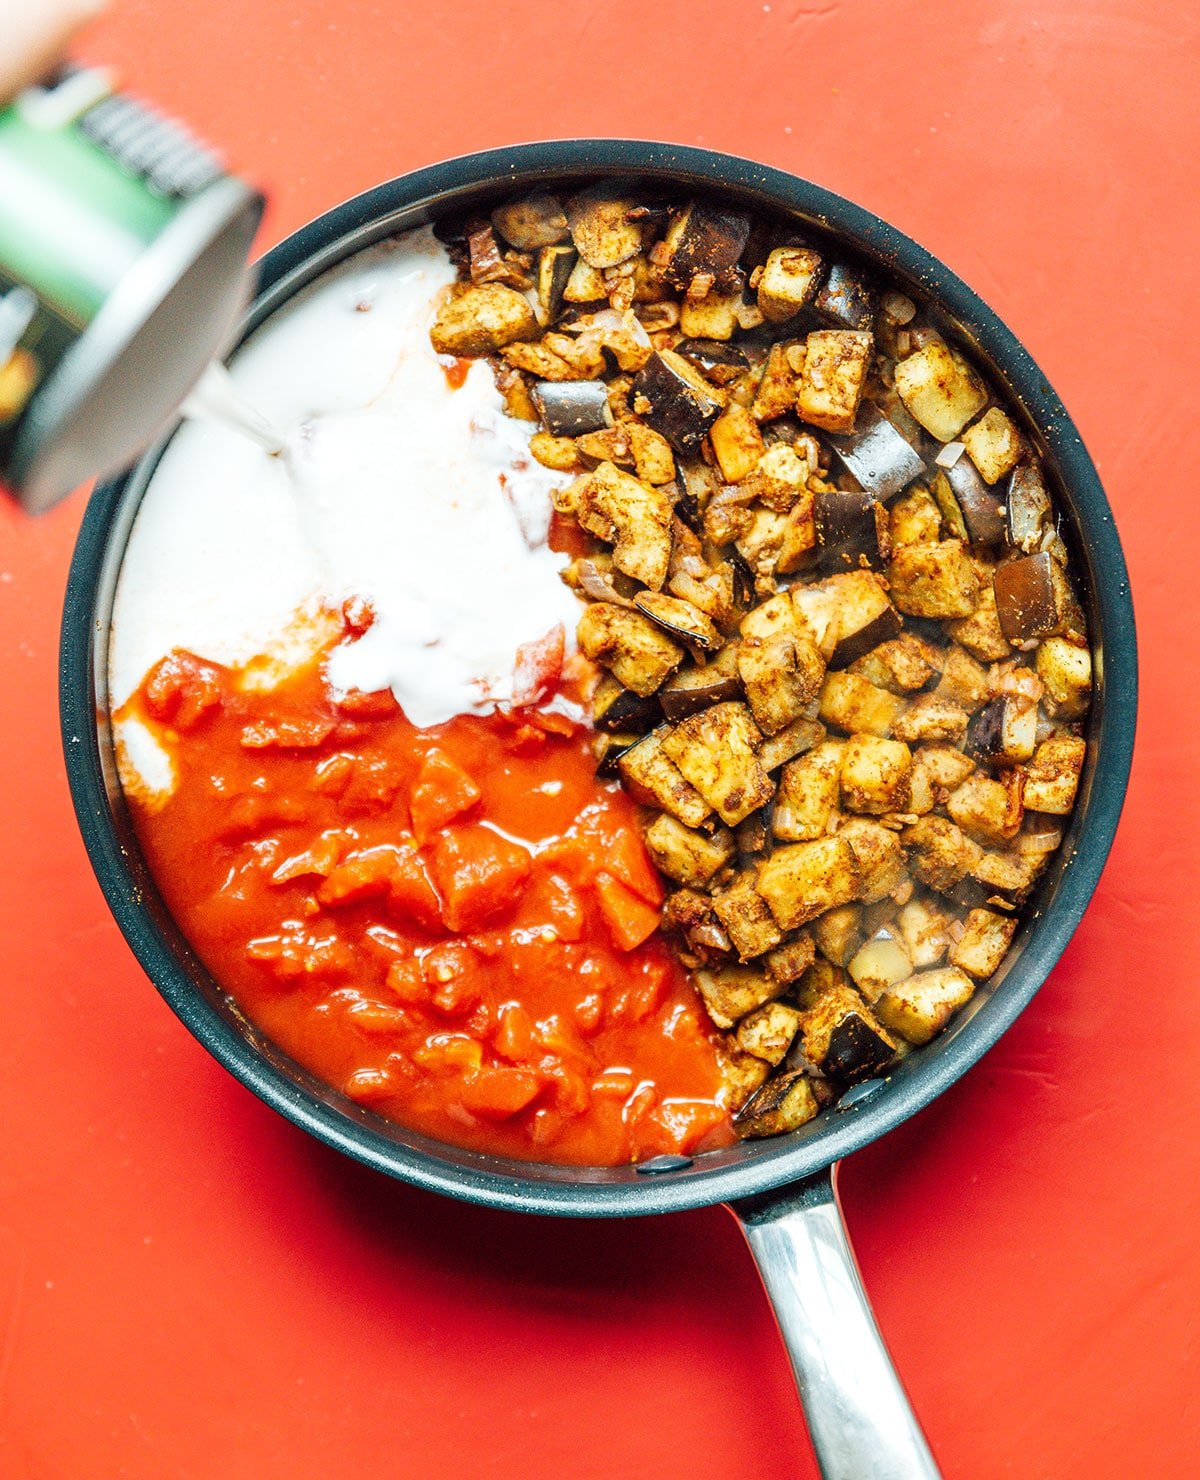 A skillet filled with diced eggplant, shallots, and garlic, along with a can of coconut milk and a can of diced tomatoes